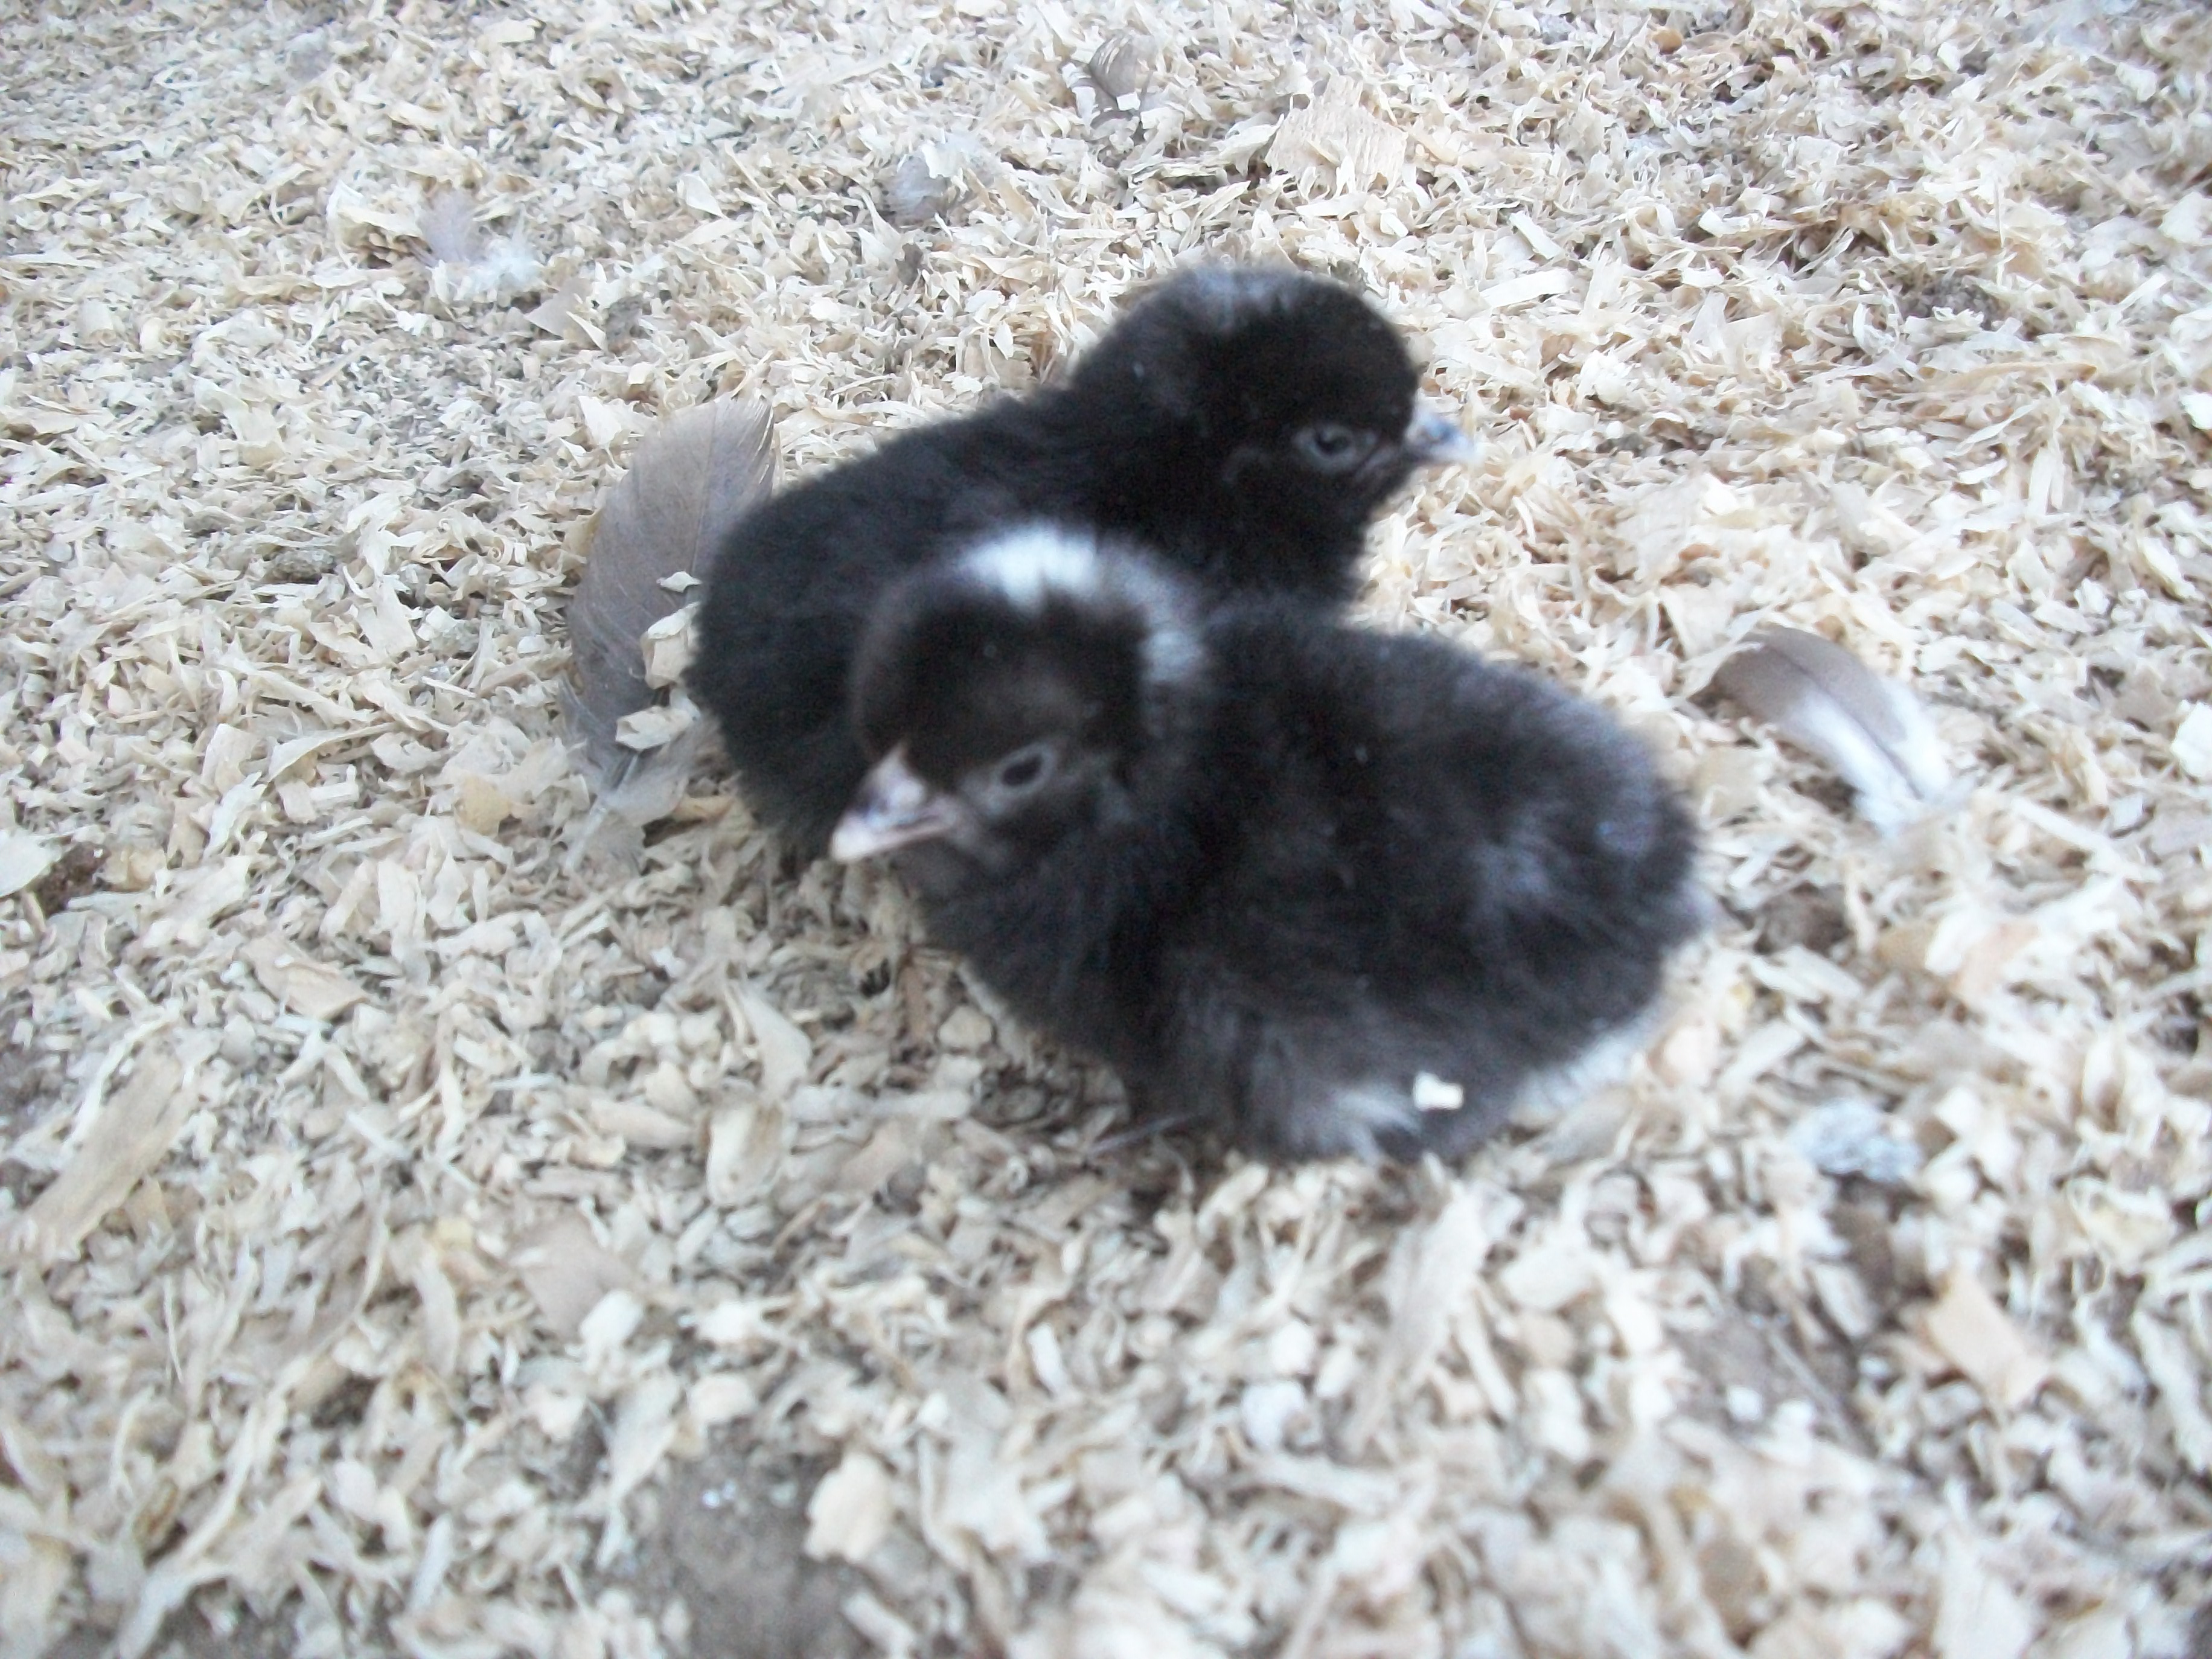 These are two of my Bantam Barred Plymouth Rocks that I hatched last spring. I hatch and sell chicks every spring. There are pictures of the parents as well. :) Absolutely stunning birds, with the sweetest personalities ever. They do very well in show or make wonderful pets.
I highly recommend them for anyone. Overall, a wonderful little bird. :)